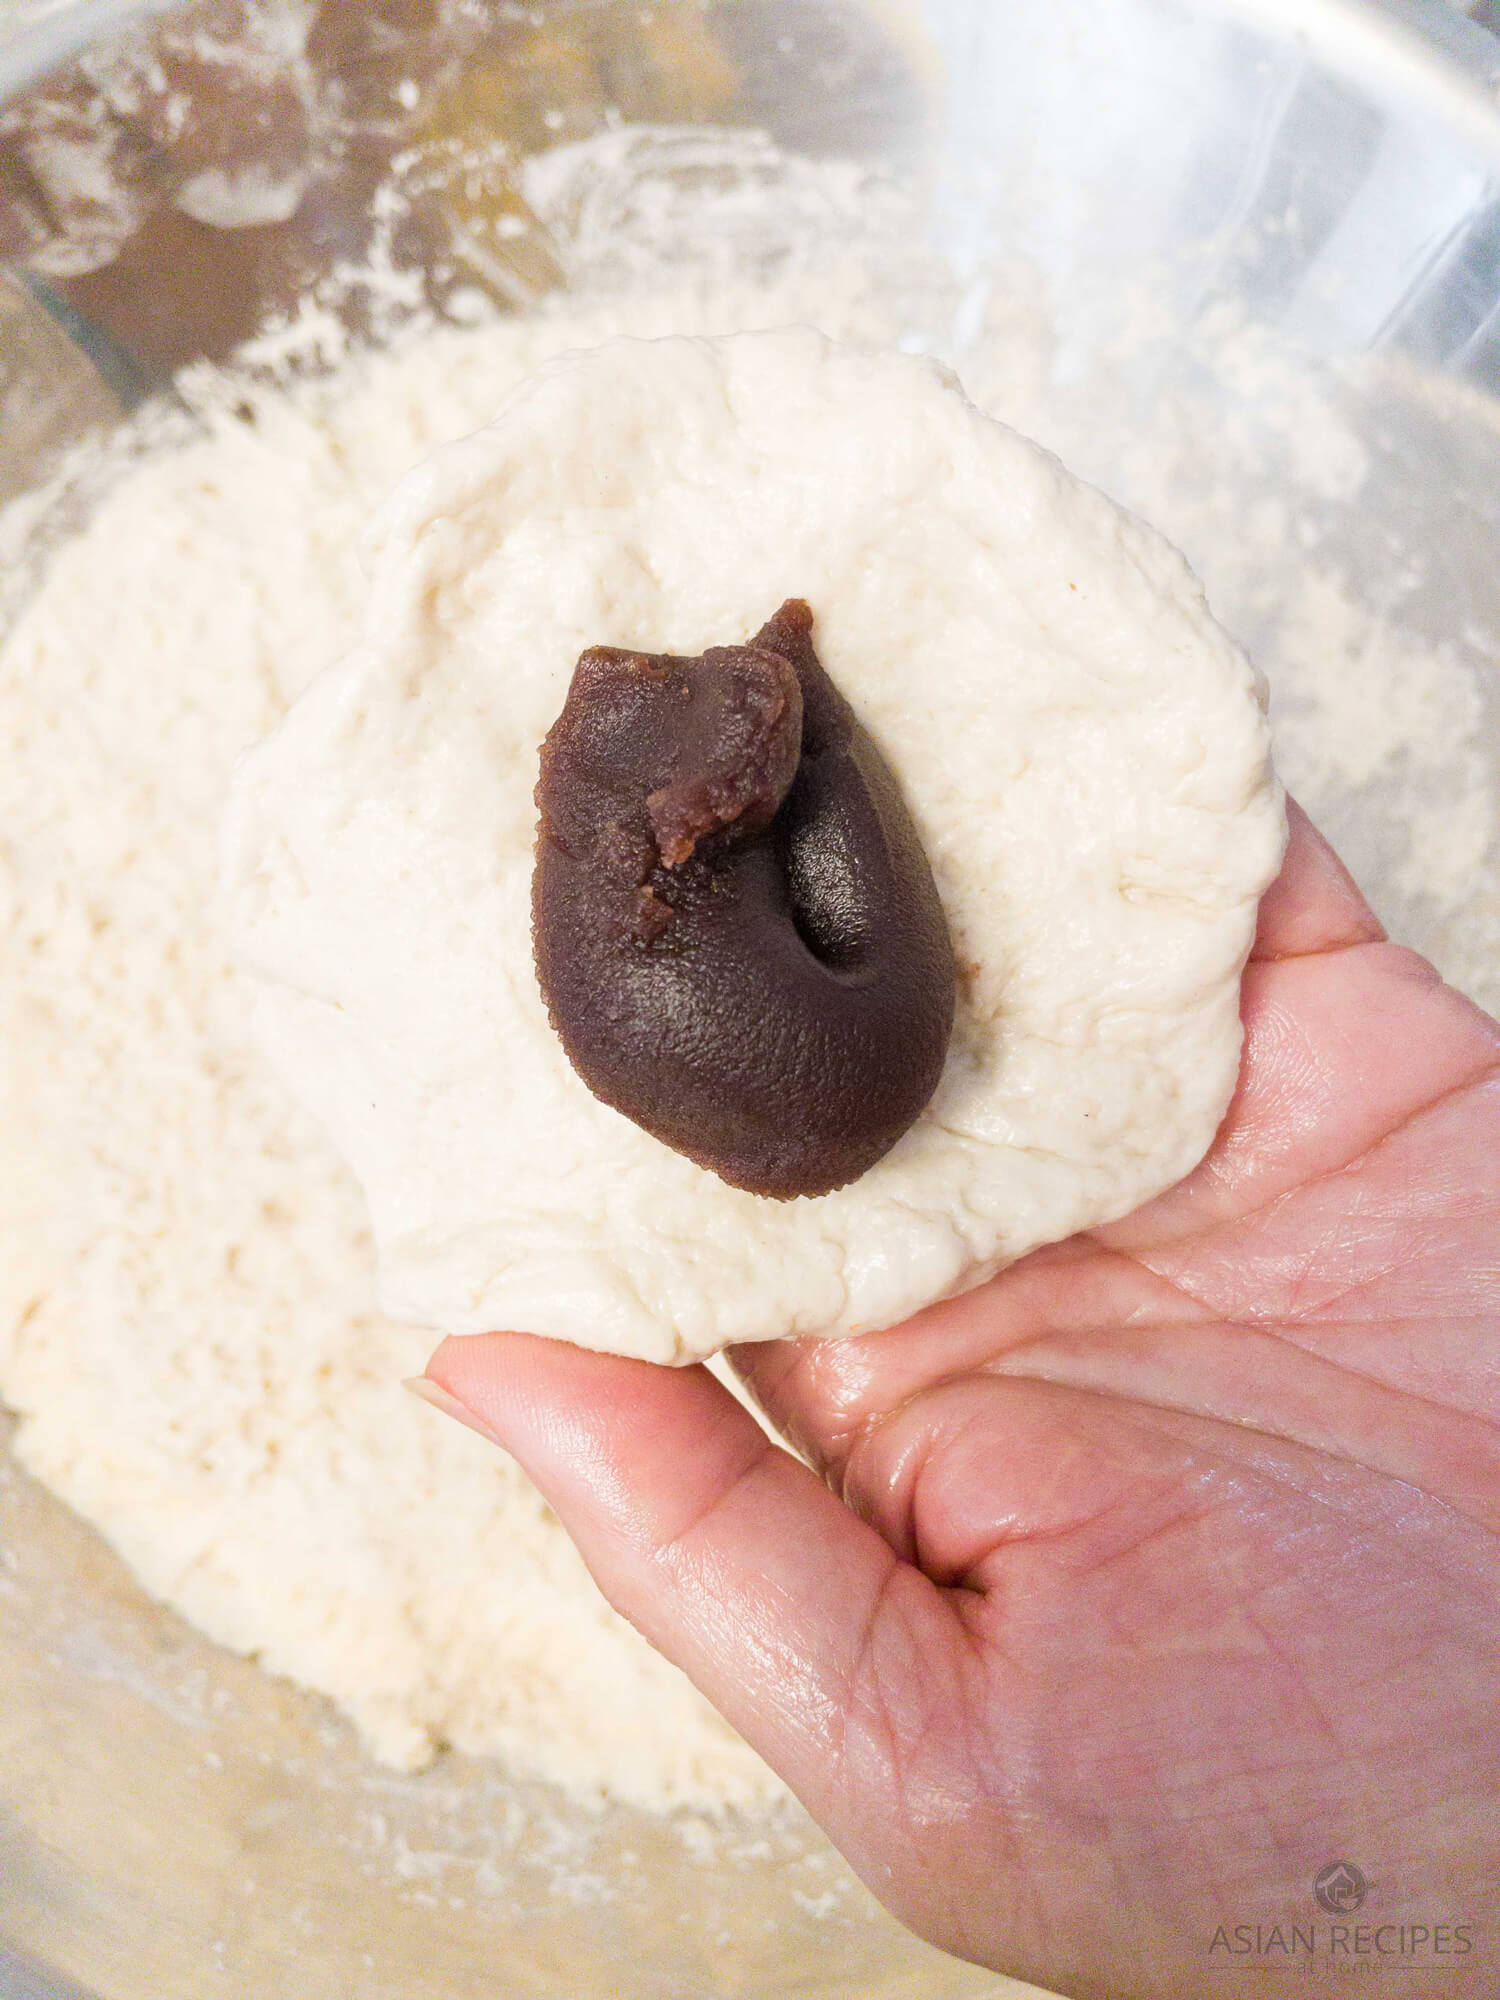 Making homemade steamed buns with sweet red bean paste.